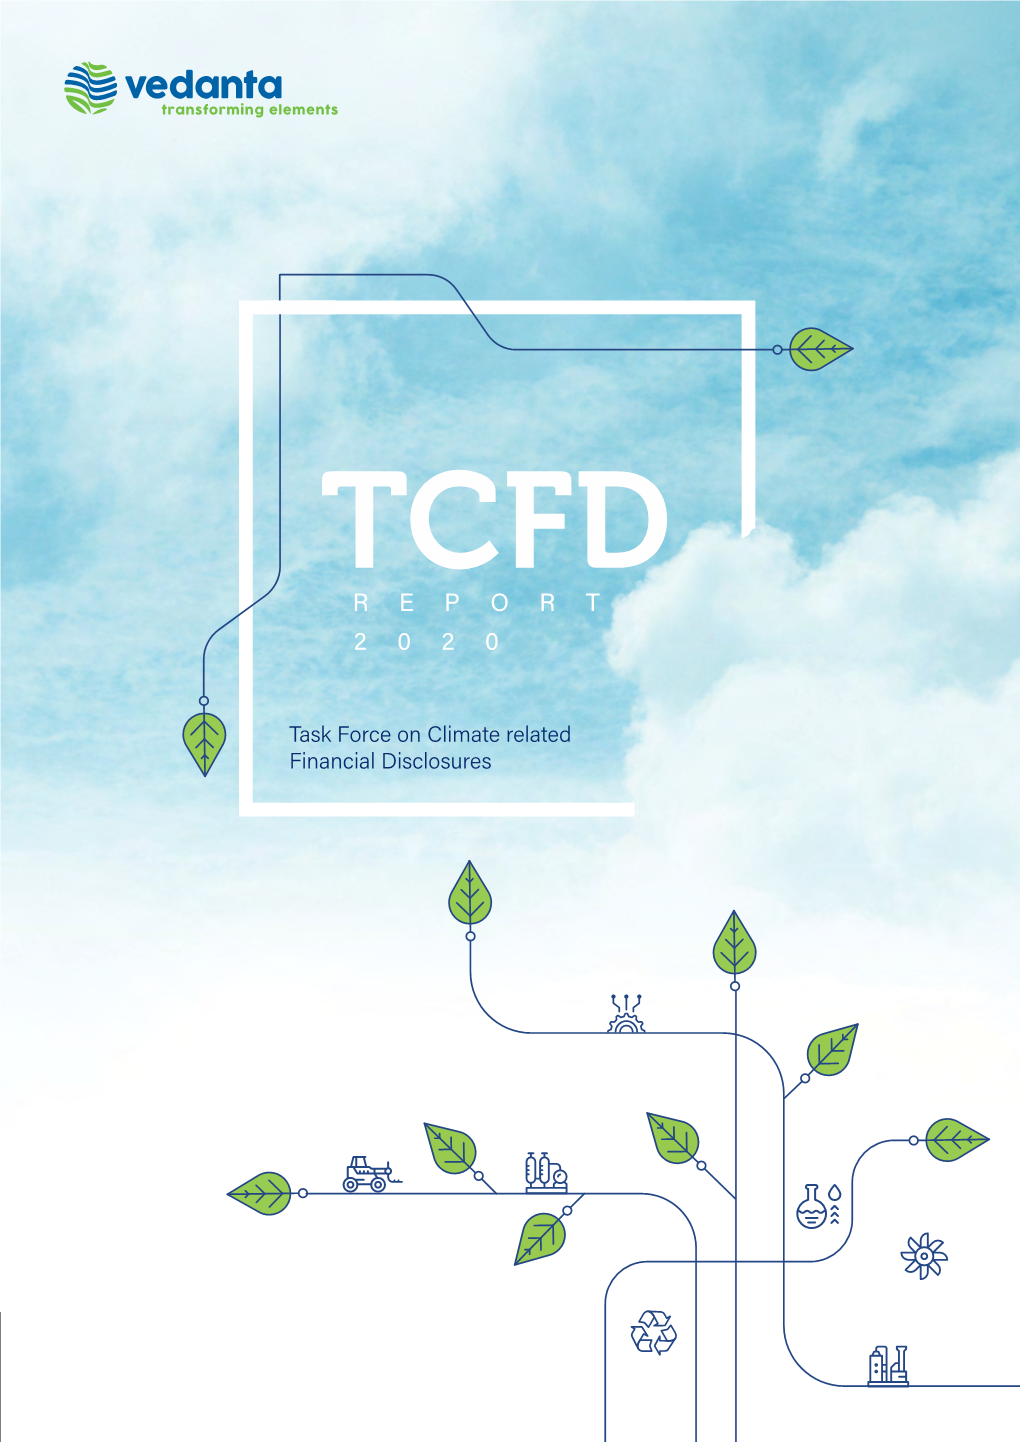 TCFD Climate Change Report